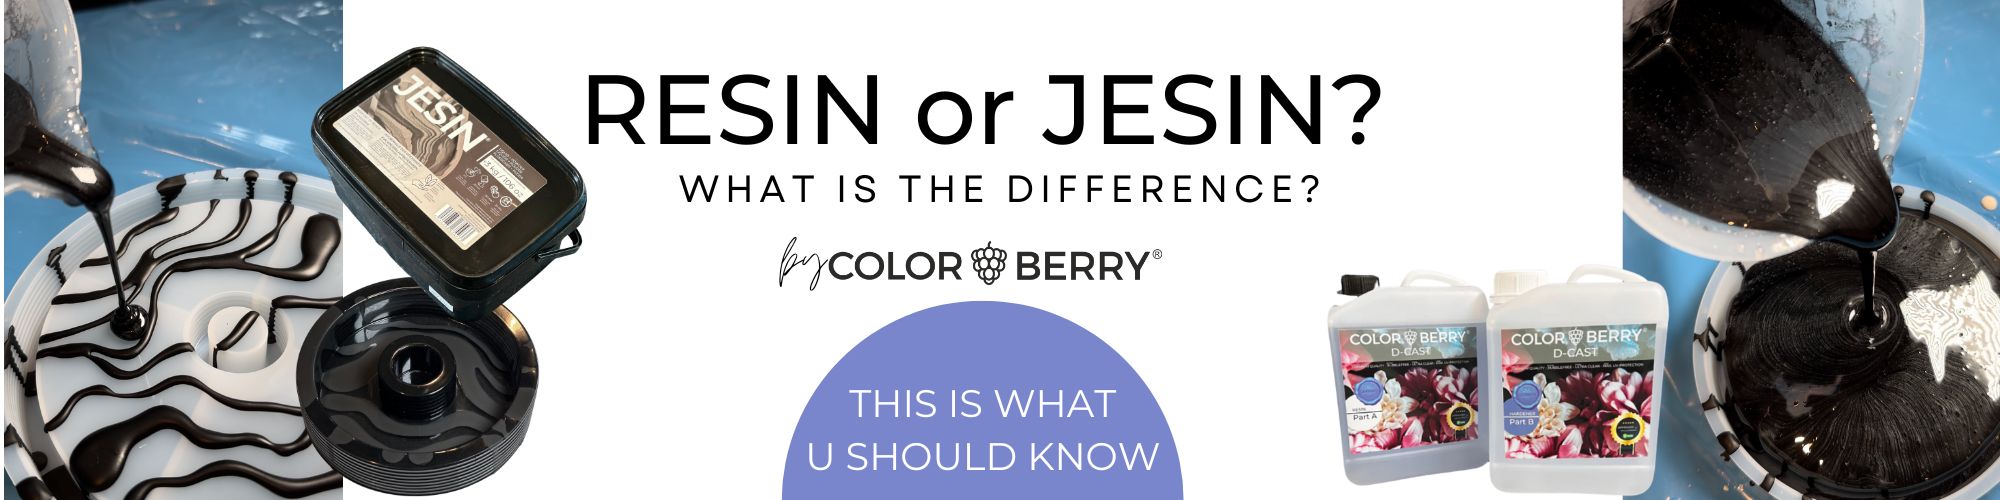 WHAT IS THE DIFFERENCE OF JESIN and RESIN?